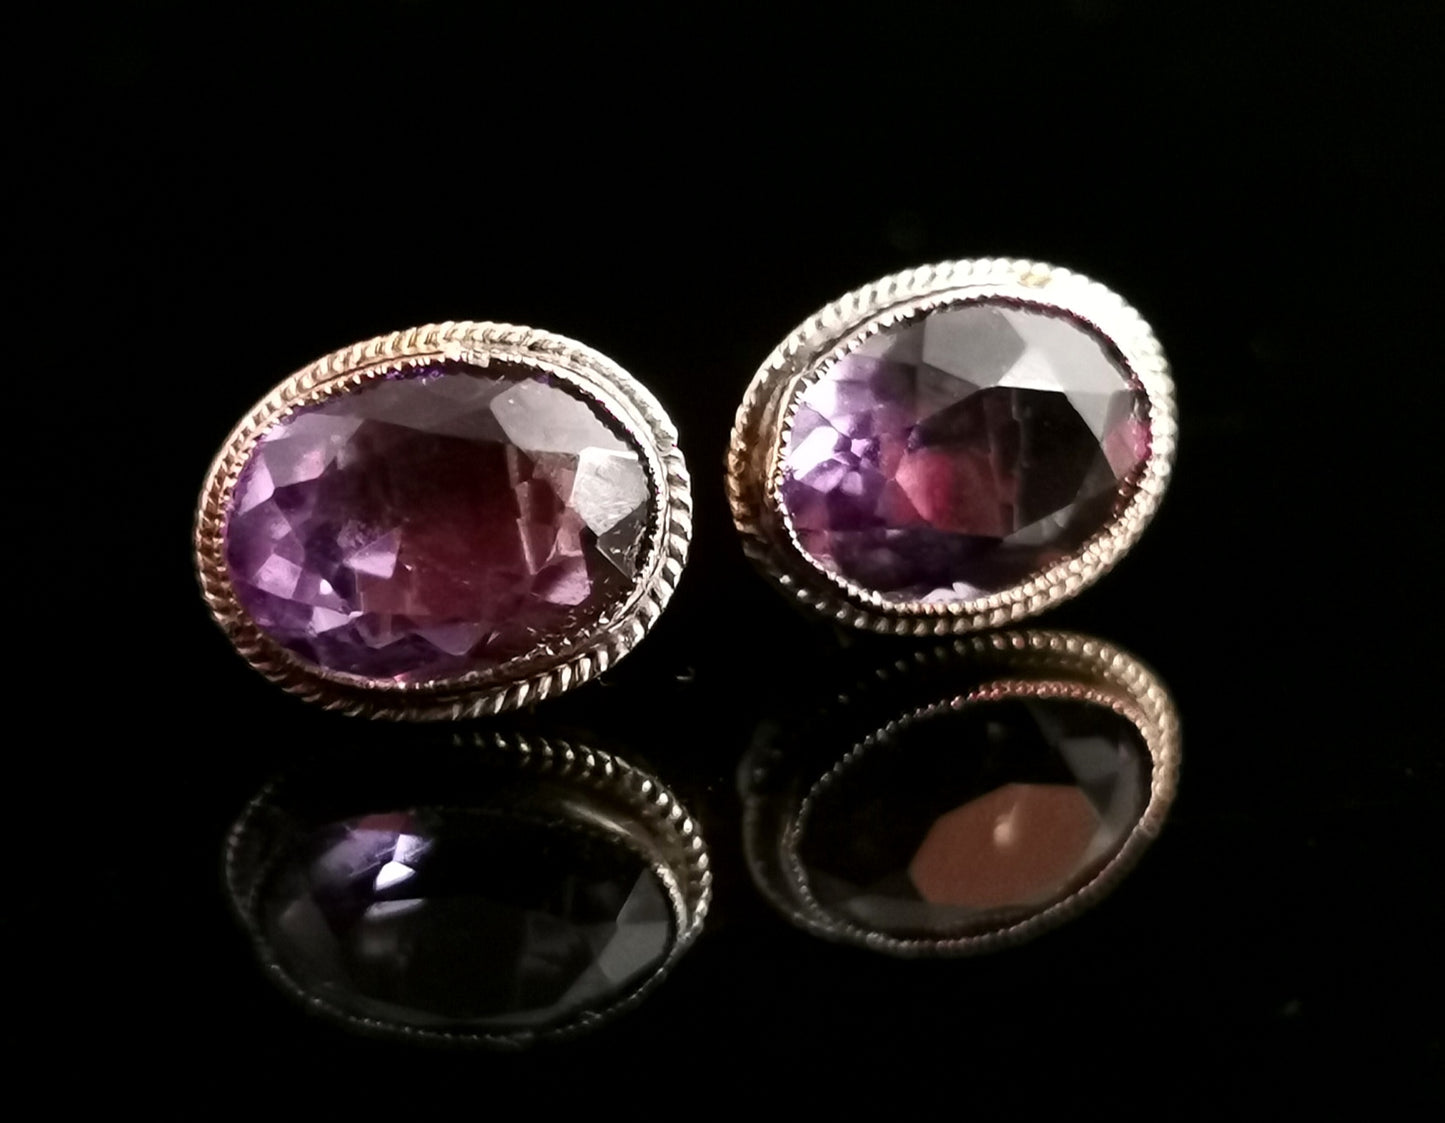 Antique Victorian 9ct gold Amethyst stud earrings